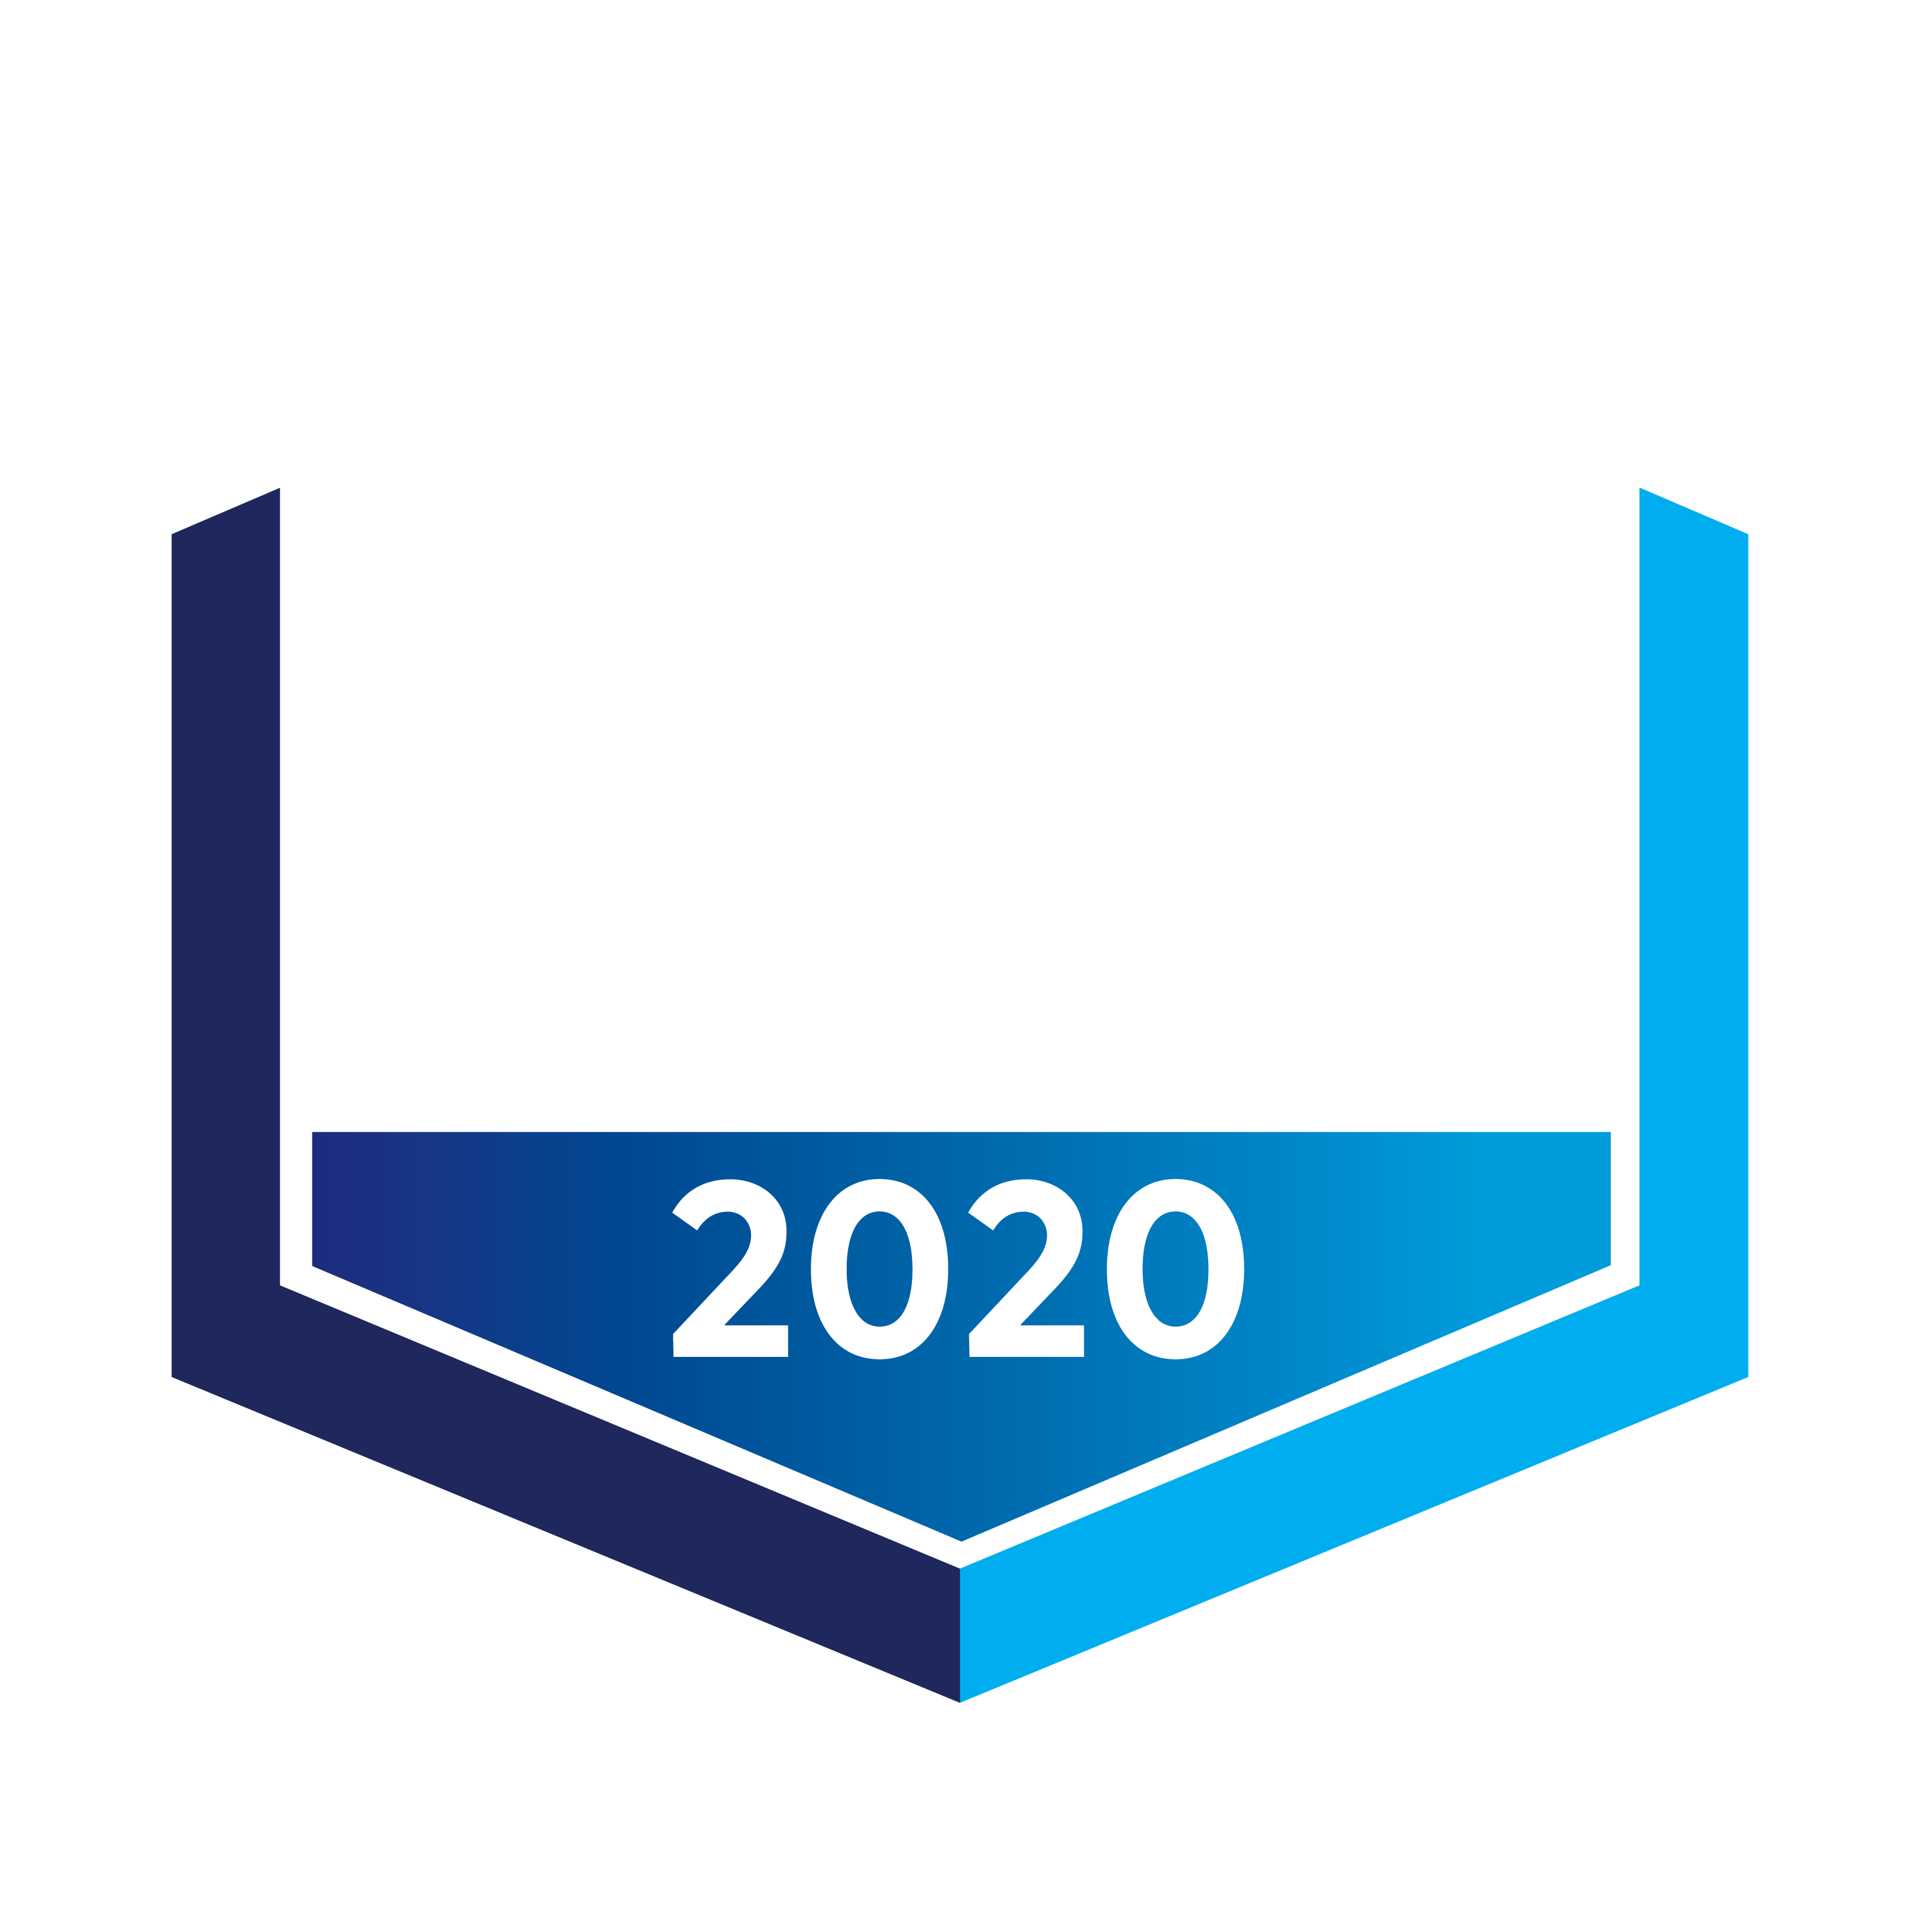 #1 Selected SIS in Traditional Sector